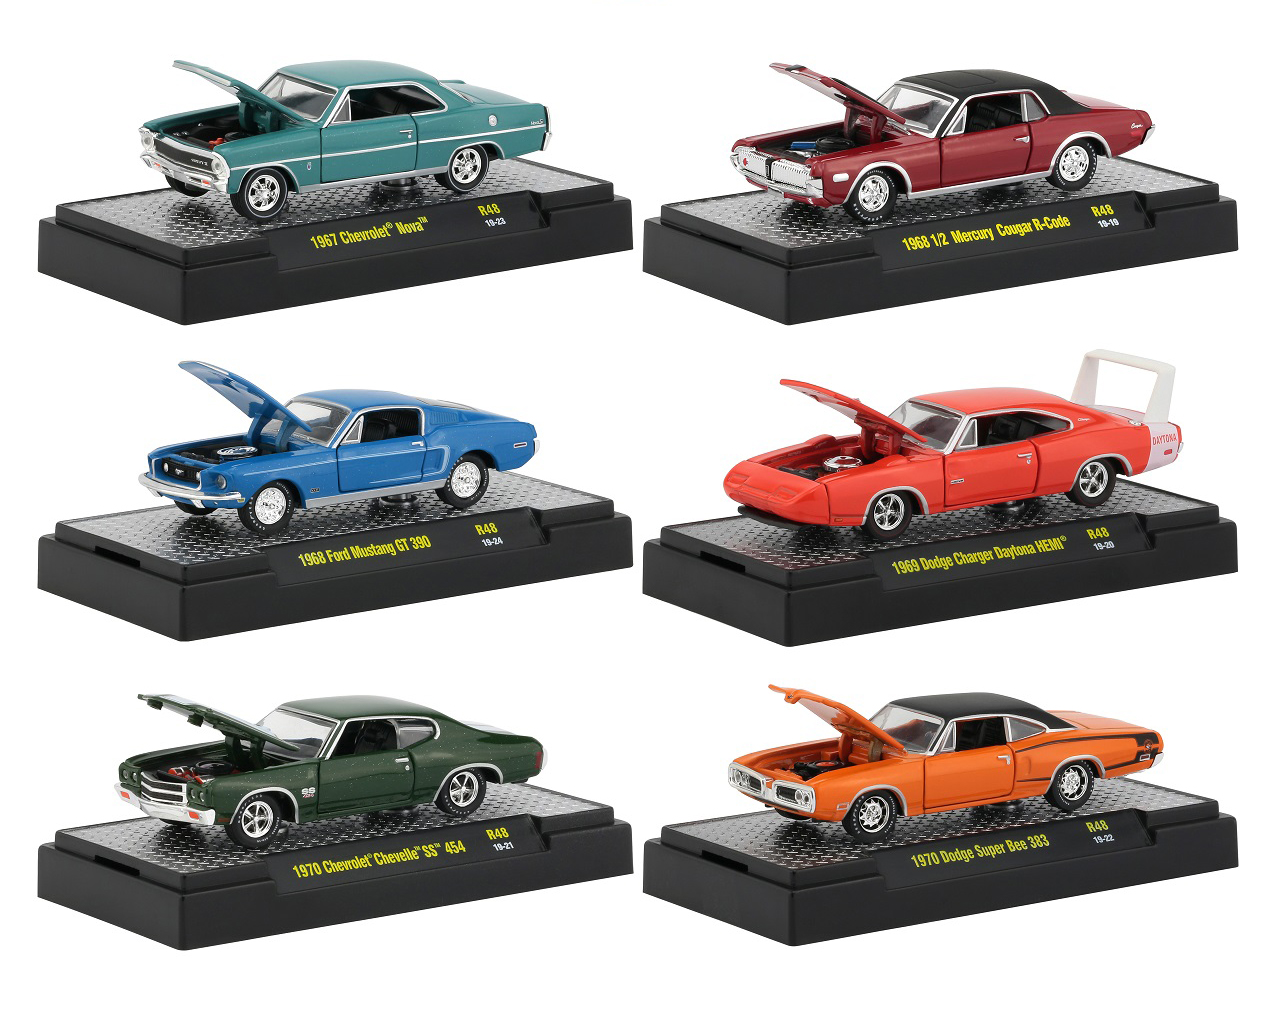 Detroit Muscle Release 48 Set Of 6 Cars In Display Cases 1/64 Diecast Model Cars By M2 Machines